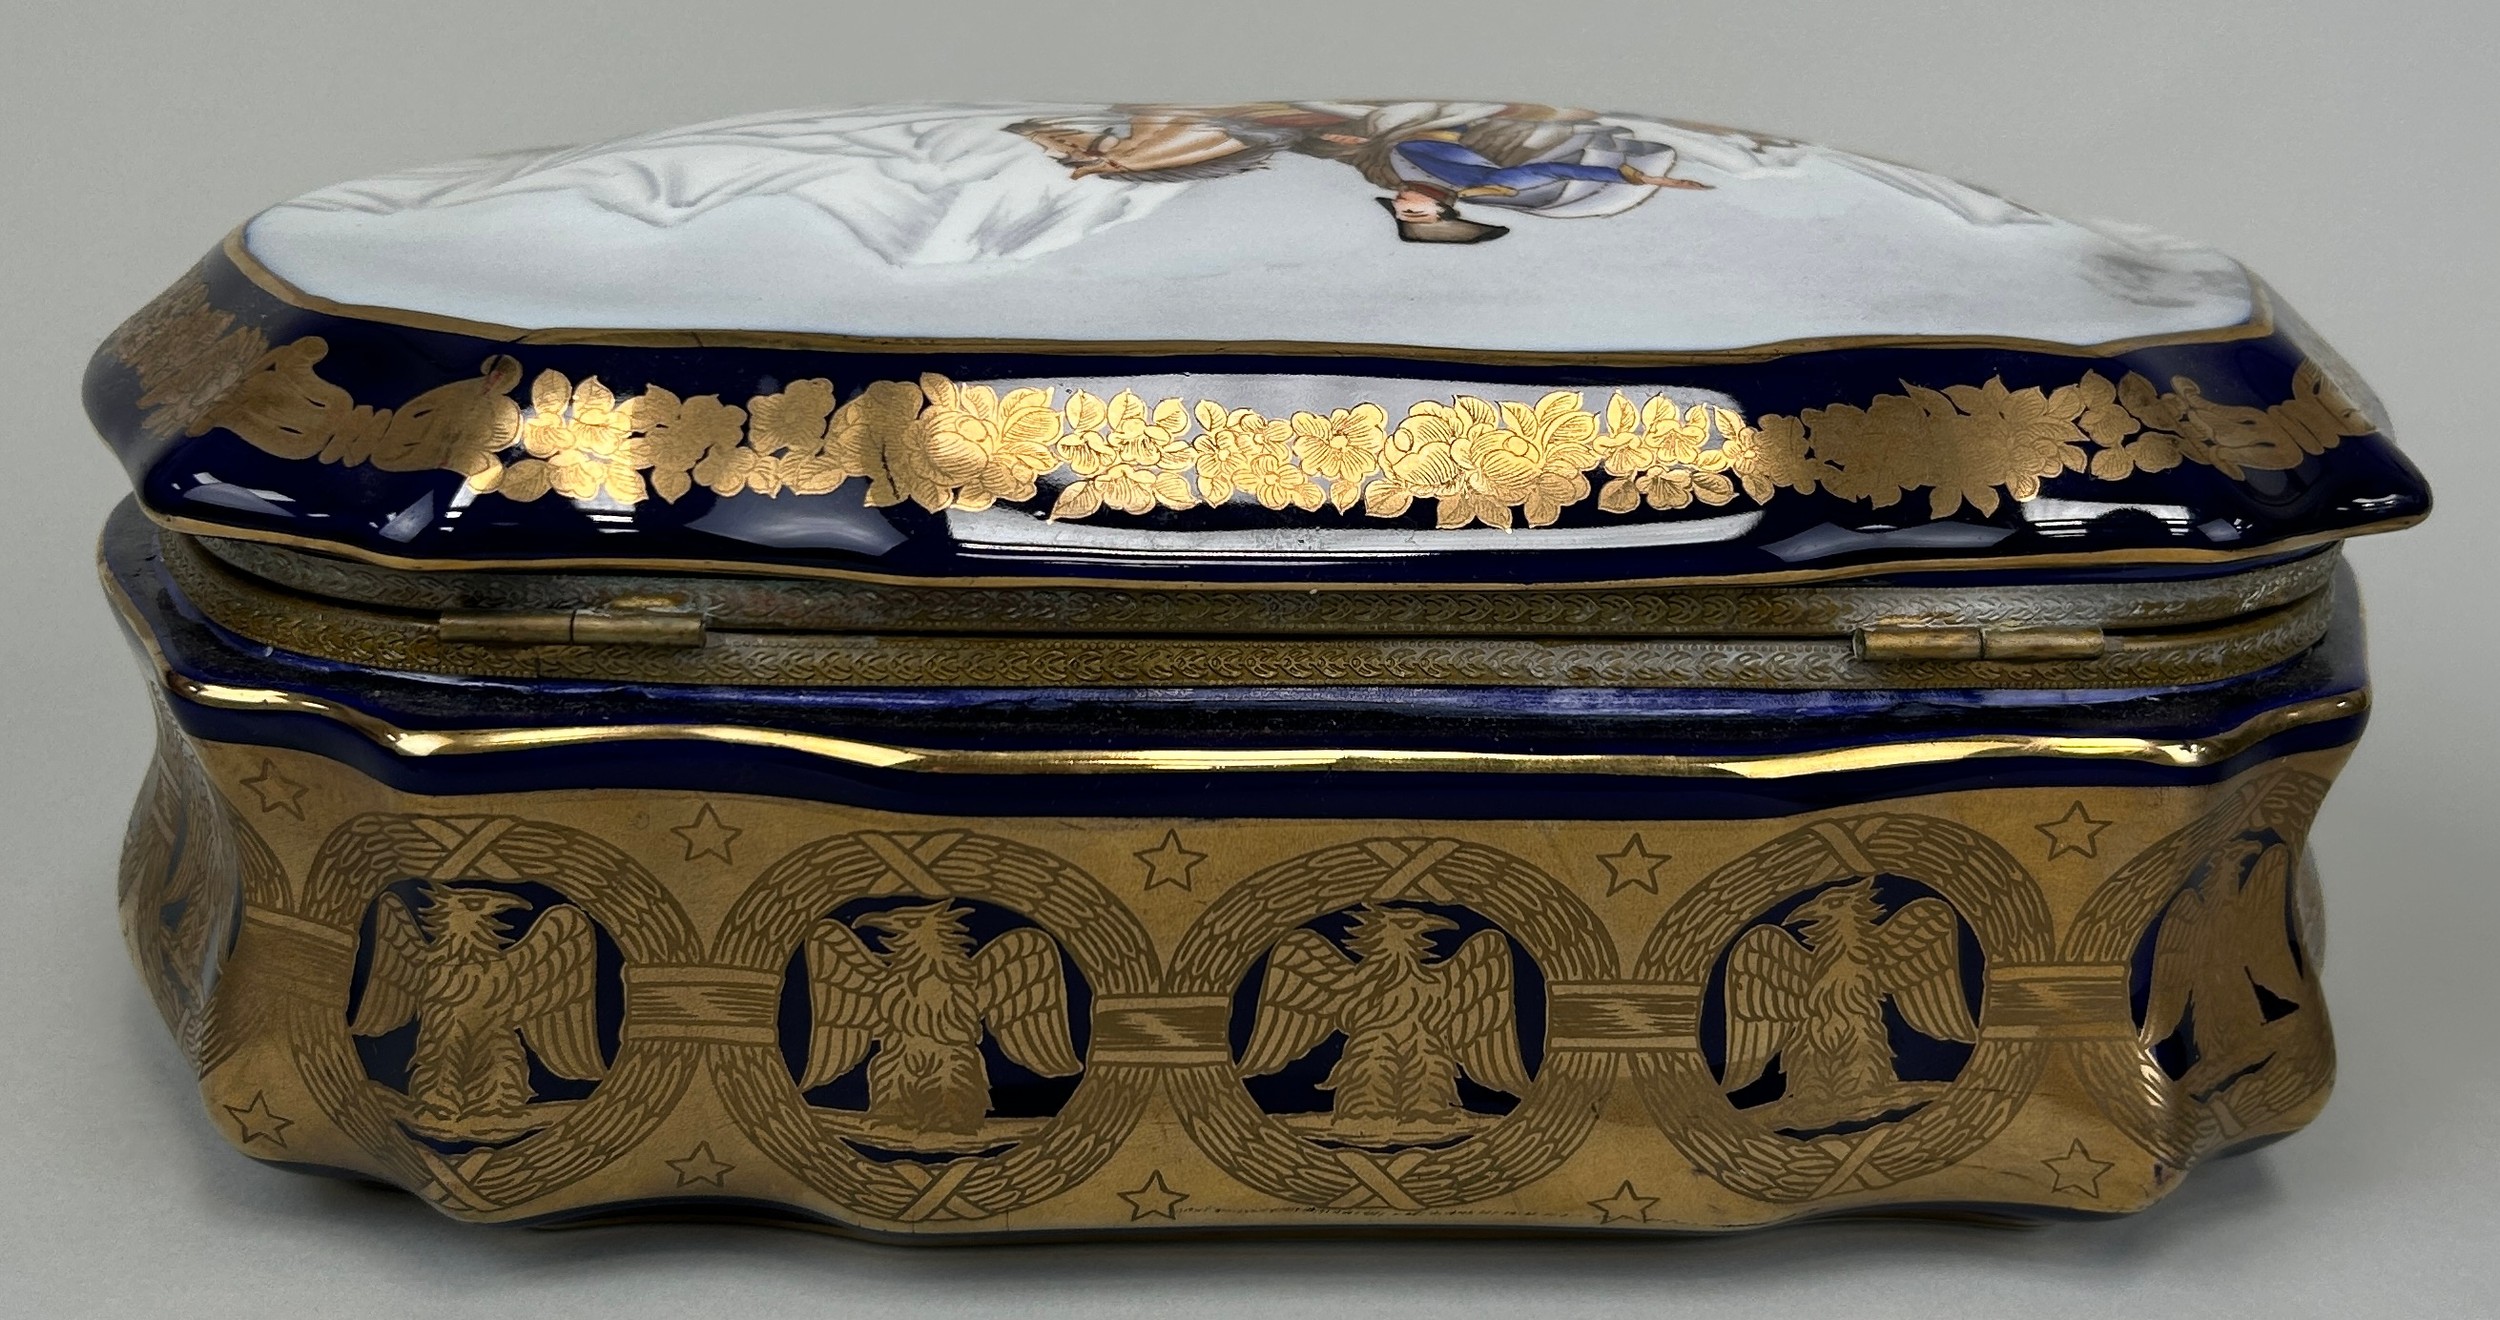 AFTER SEVRES: A SEVRES STYLE PORCELAIN BOX DECORATED WITH A HORSE AND RIDER, WITH GILT EAGLES. - Image 3 of 5